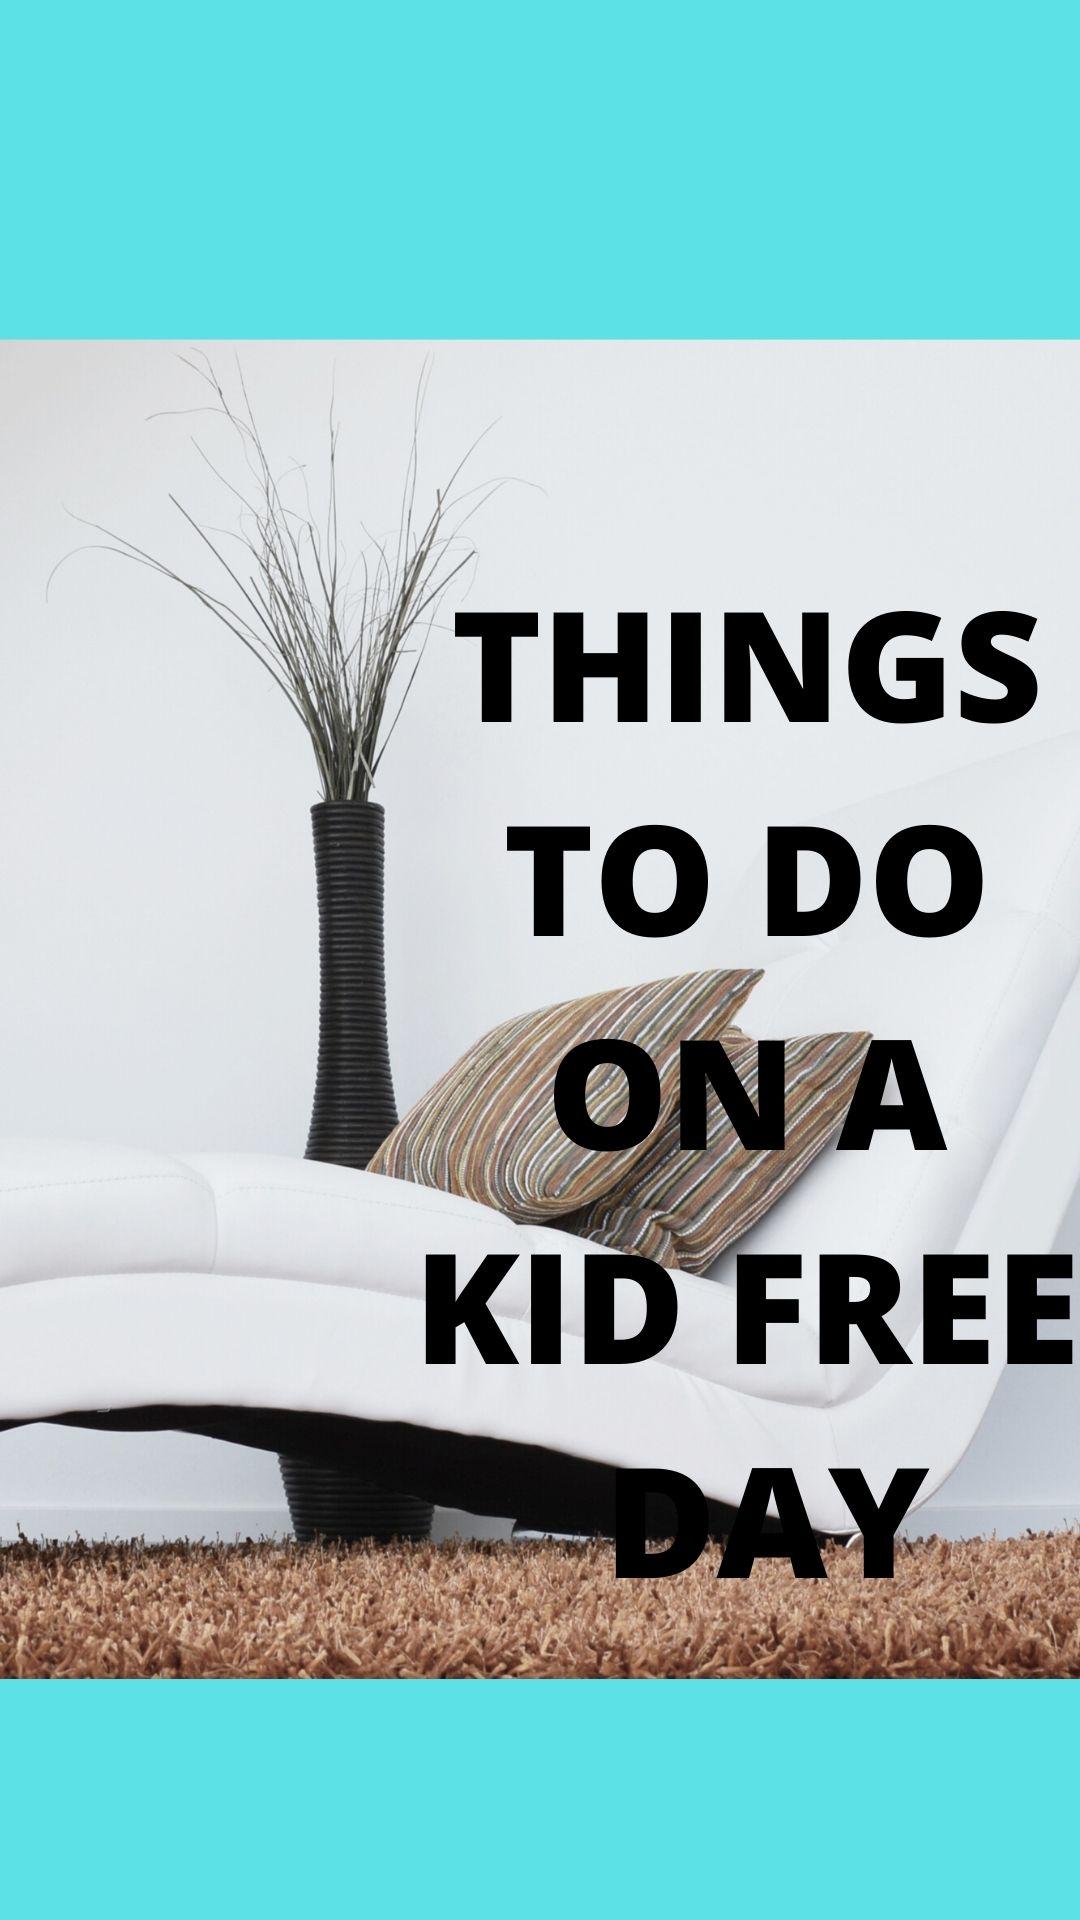 How to Spend a Kid-Free Day/Time Away from Kids